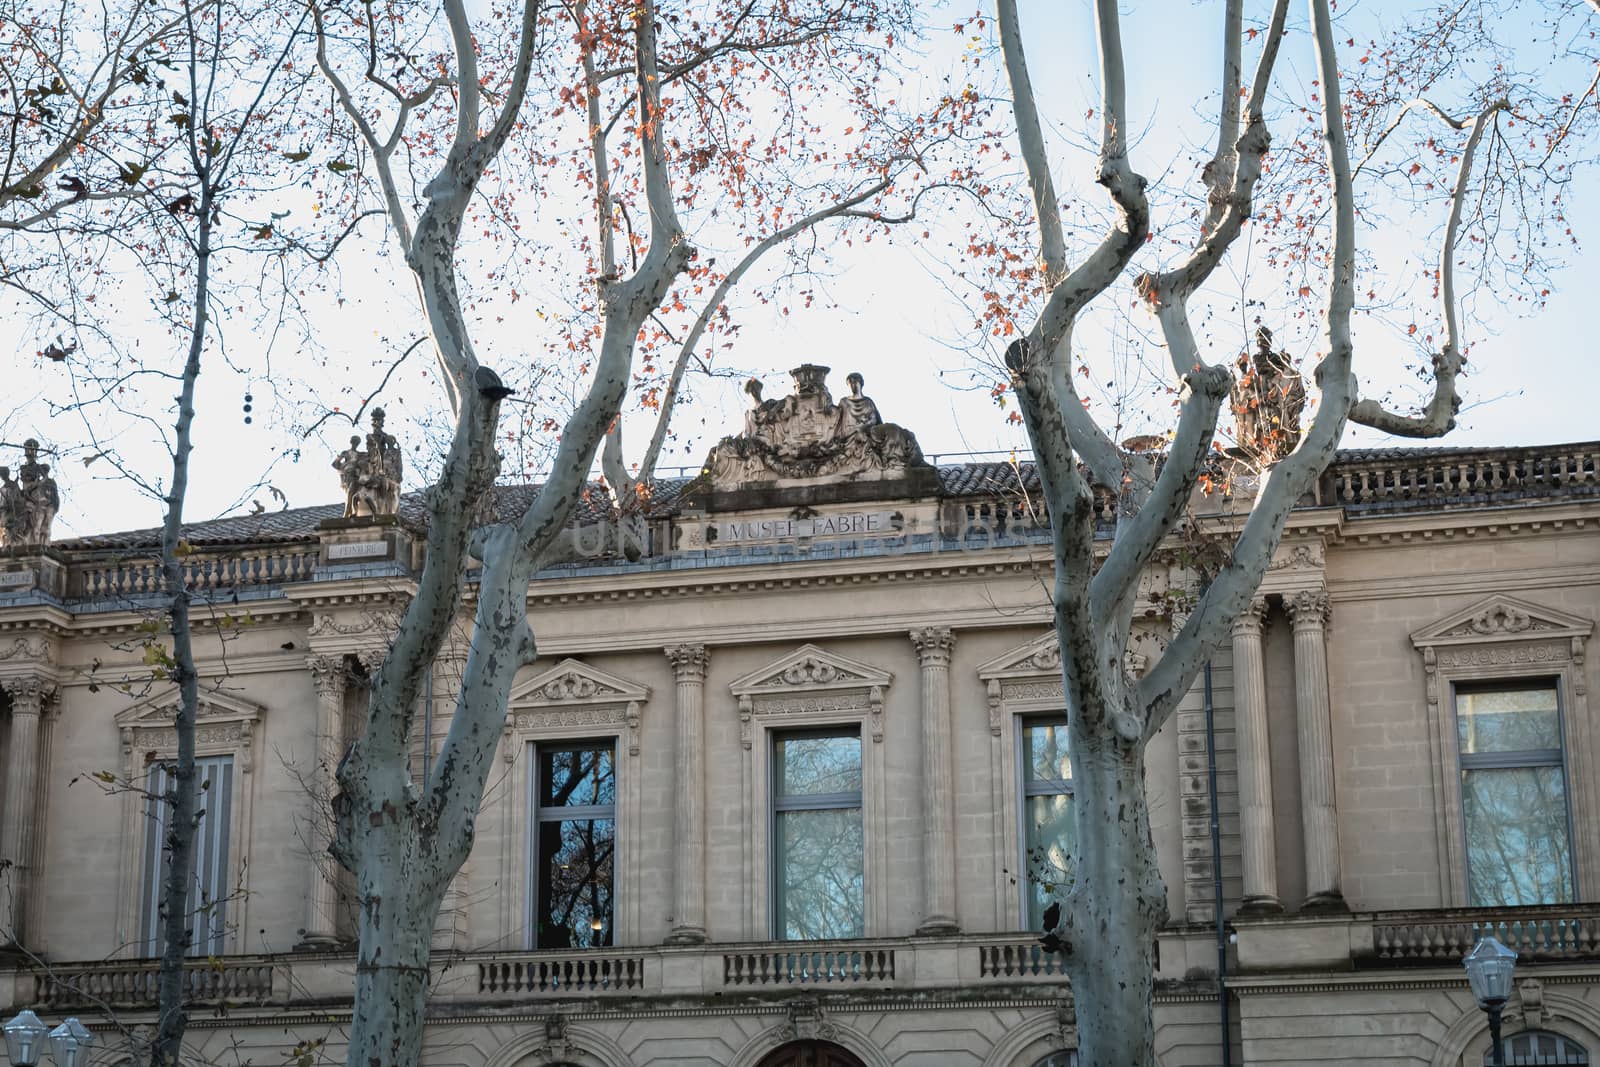 architectural detail of the Fabre museum in Montpellier by AtlanticEUROSTOXX